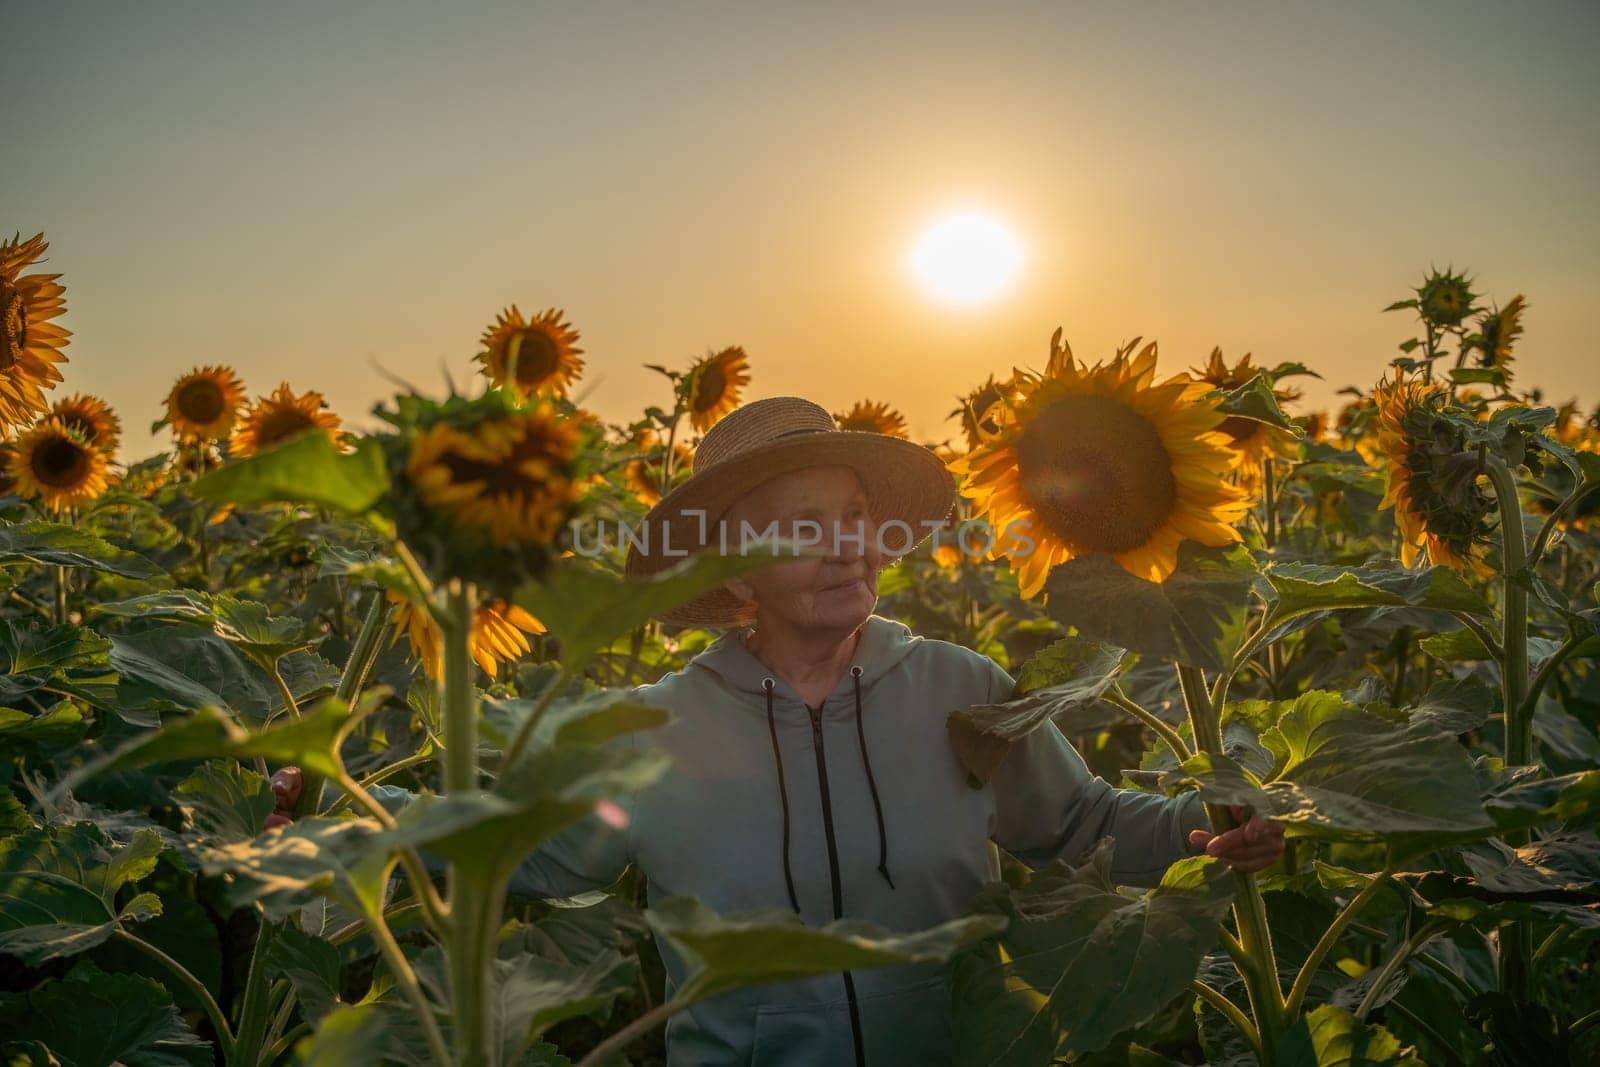 A woman wearing a straw hat stands in a field of sunflowers. The sun is setting in the background, casting a warm glow over the scene. The woman is enjoying the beauty of the flowers